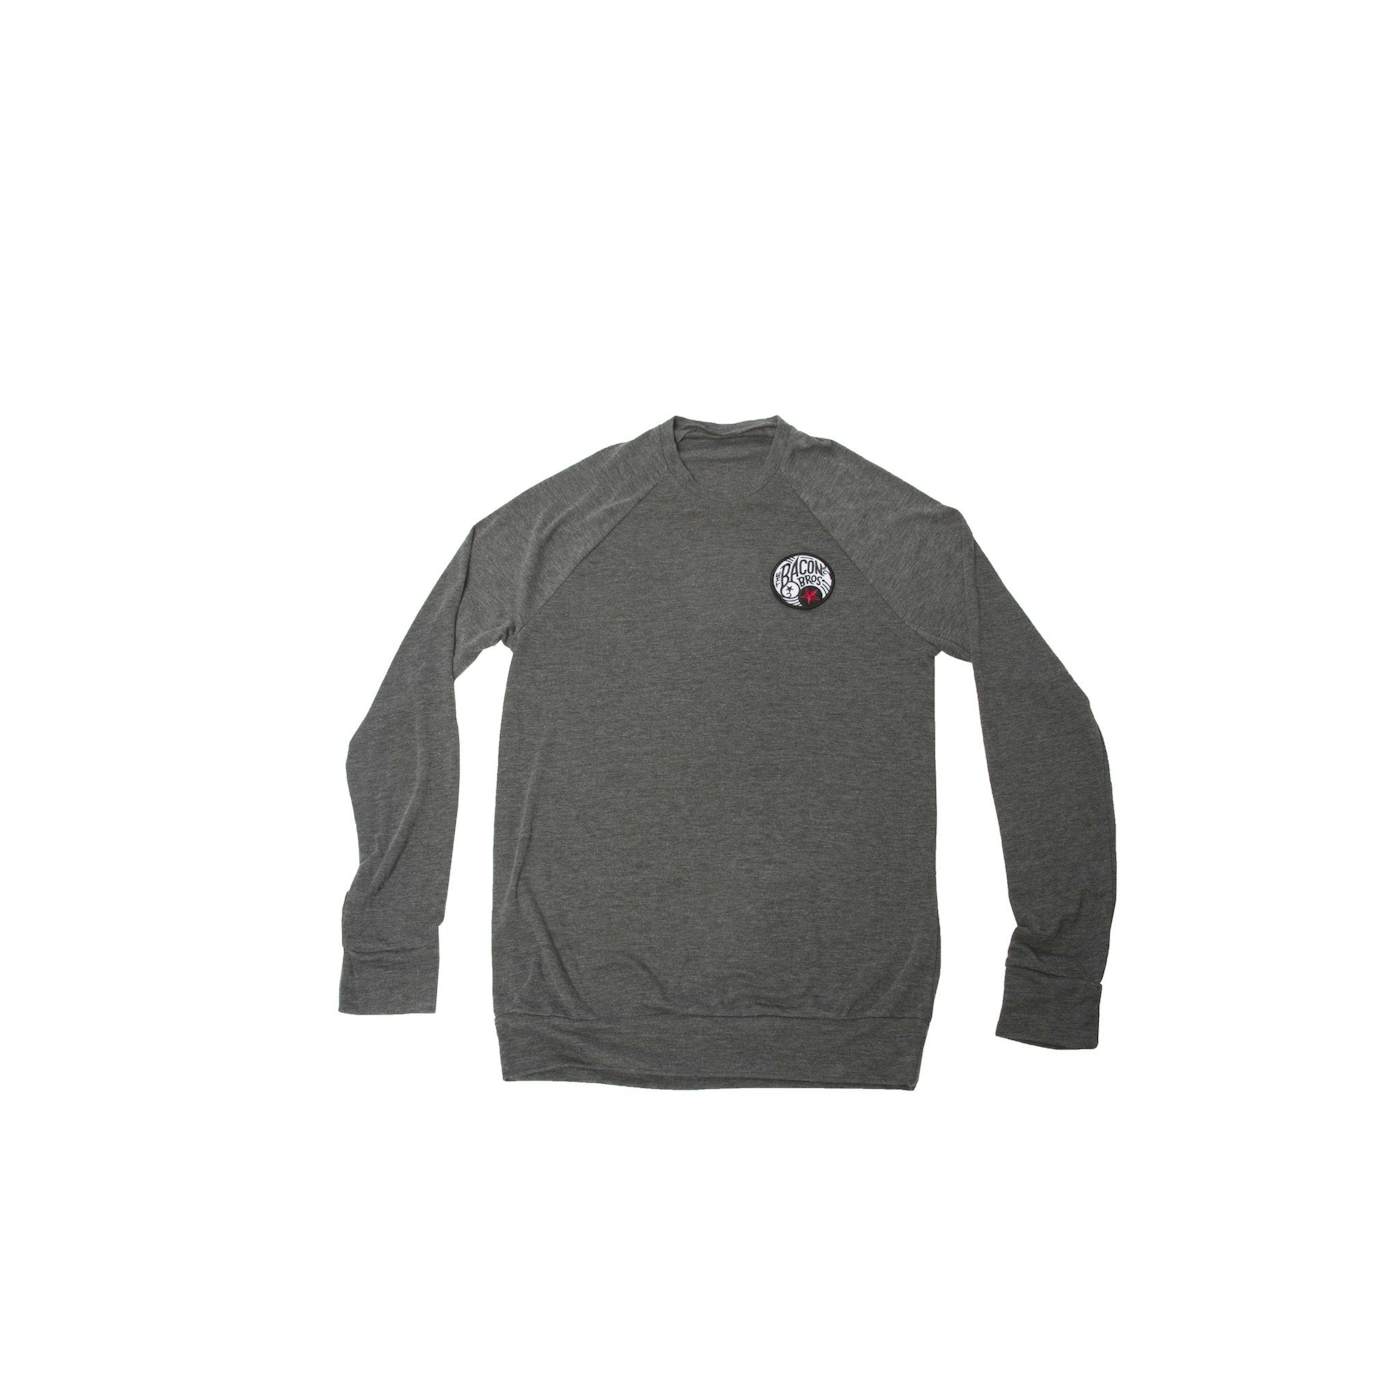 The Bacon Brothers Patch Lightweight Sweater